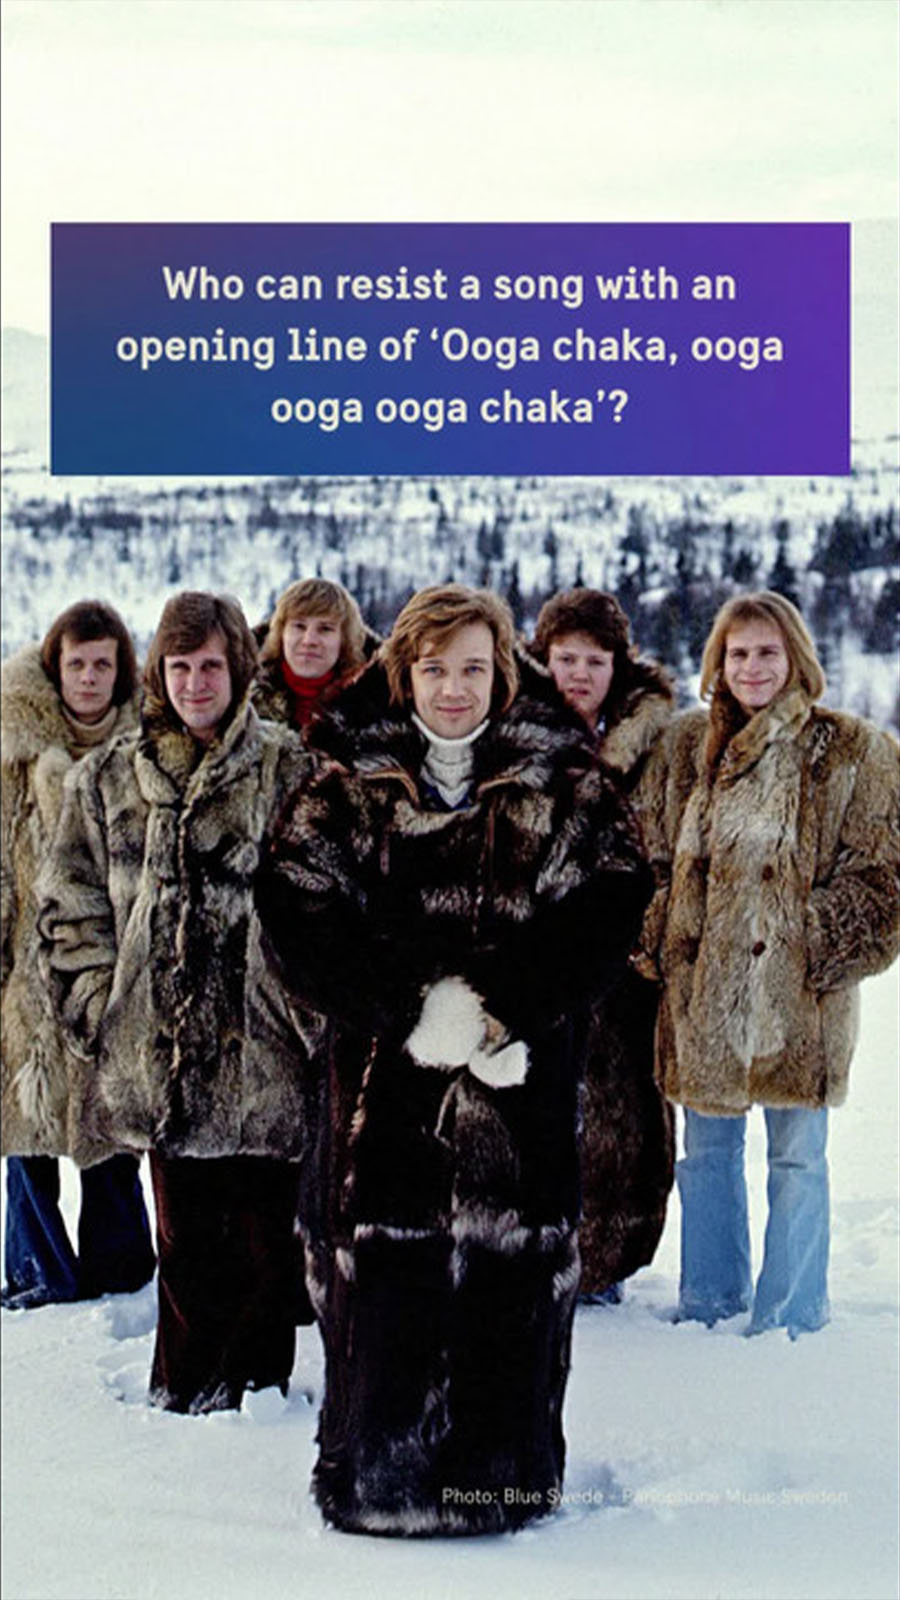 Swedish Blue Swede band portrayed outdoors in a wintry landscape.